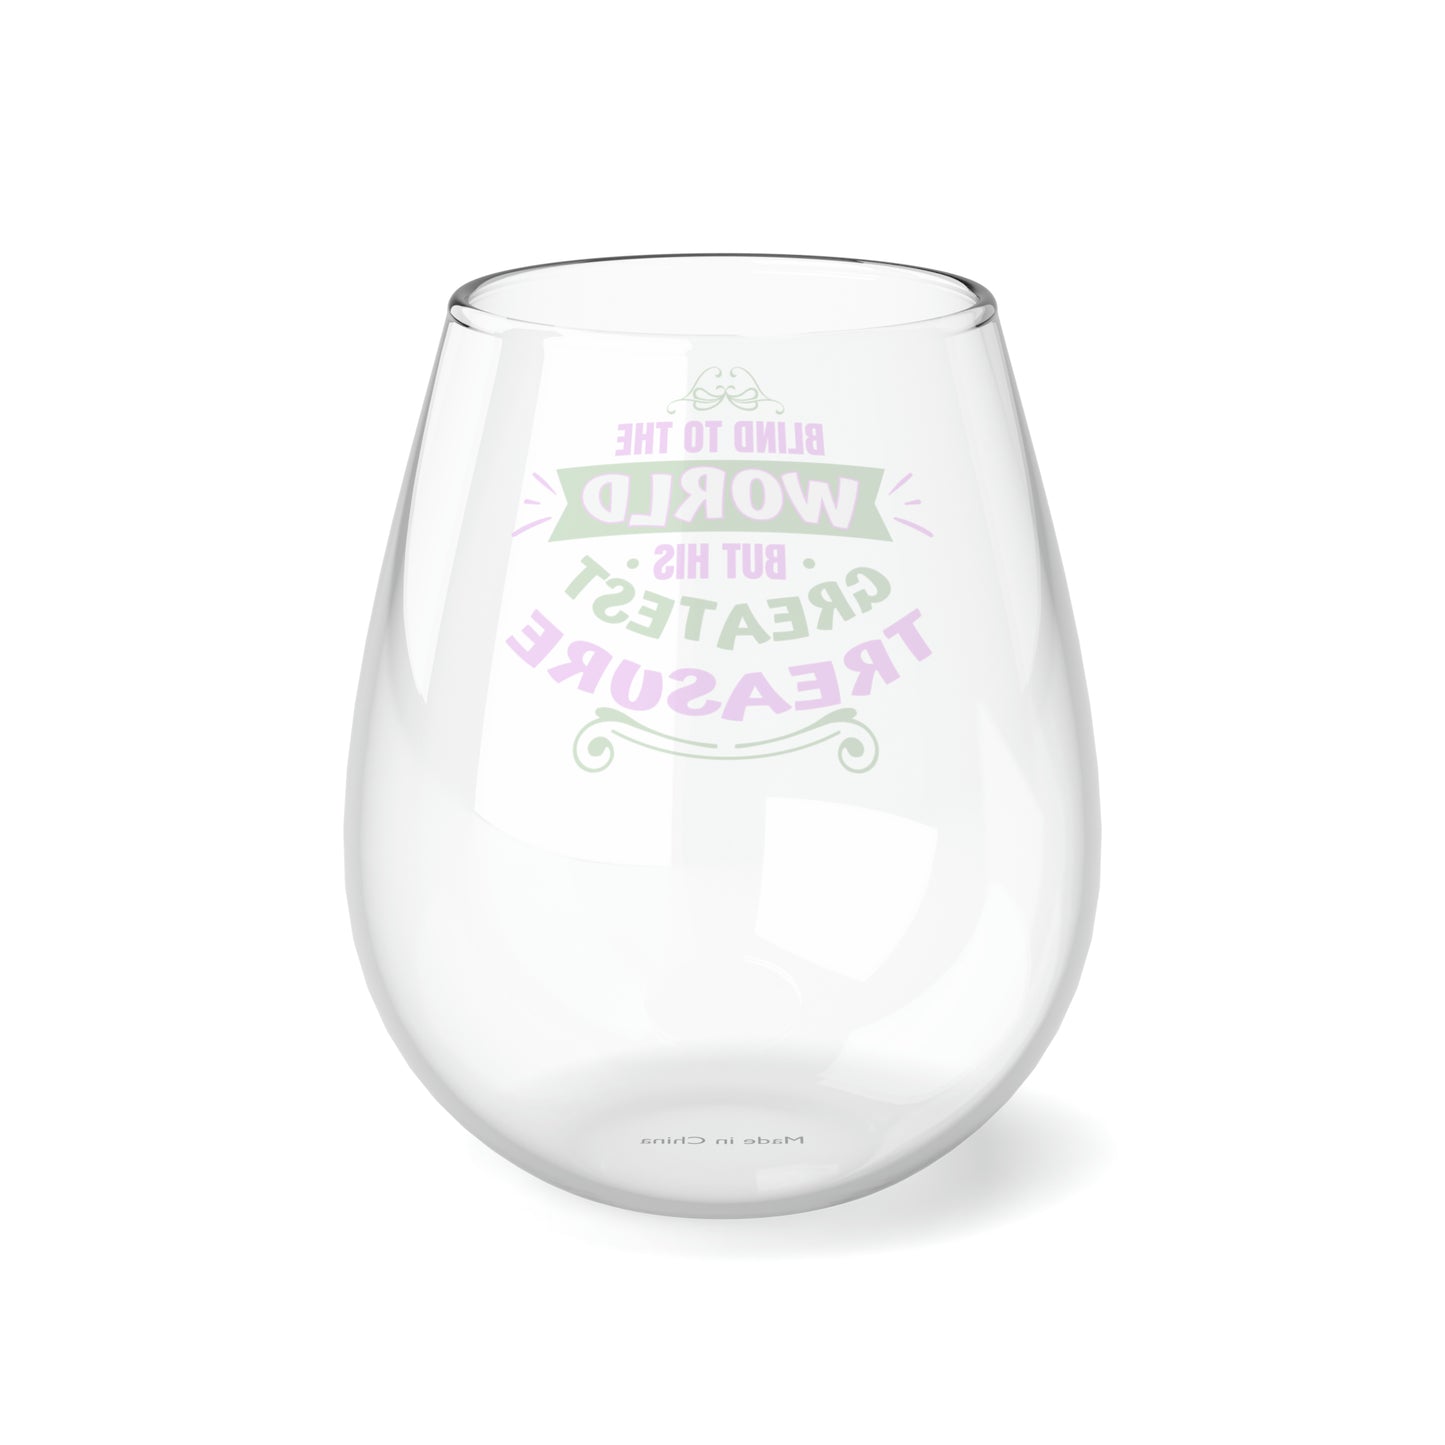 Blind To The World But His Greatest Treasure Stemless Wine Glass, 11.75oz